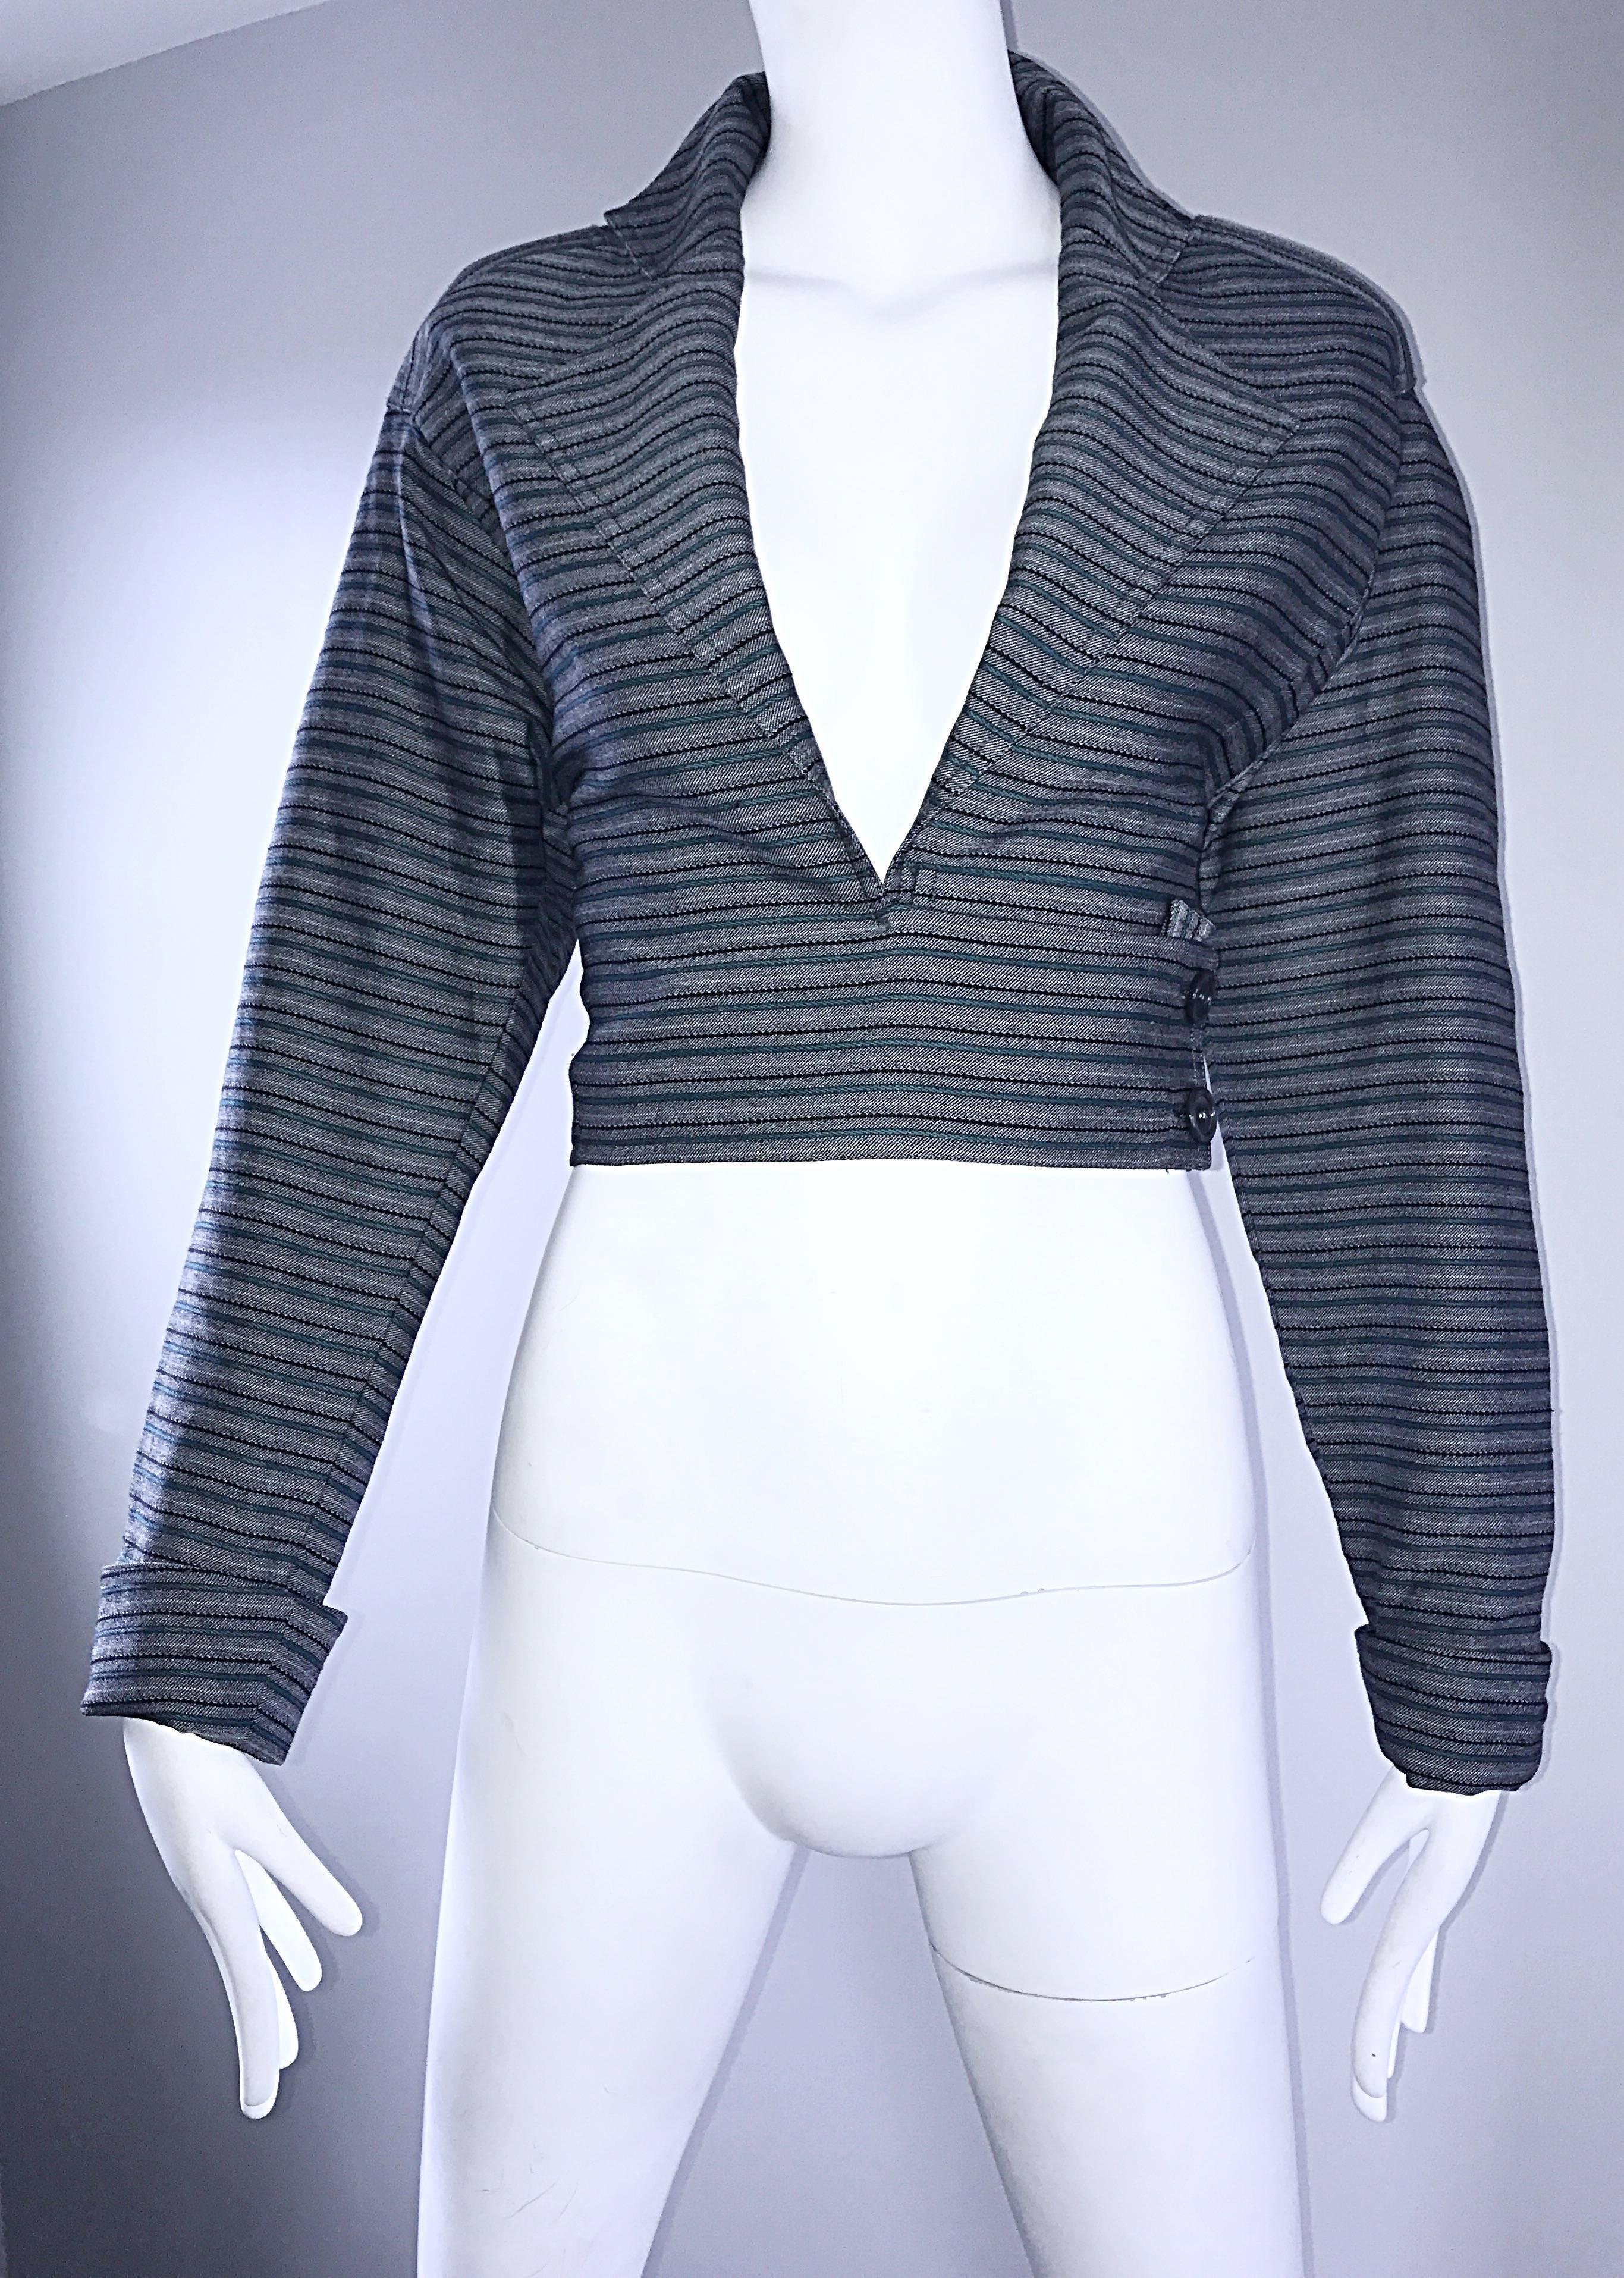 Chic Vintage Bernard Perris Gray + Blue + Green Striped Cropped Bolero Jacket  In Excellent Condition For Sale In San Diego, CA